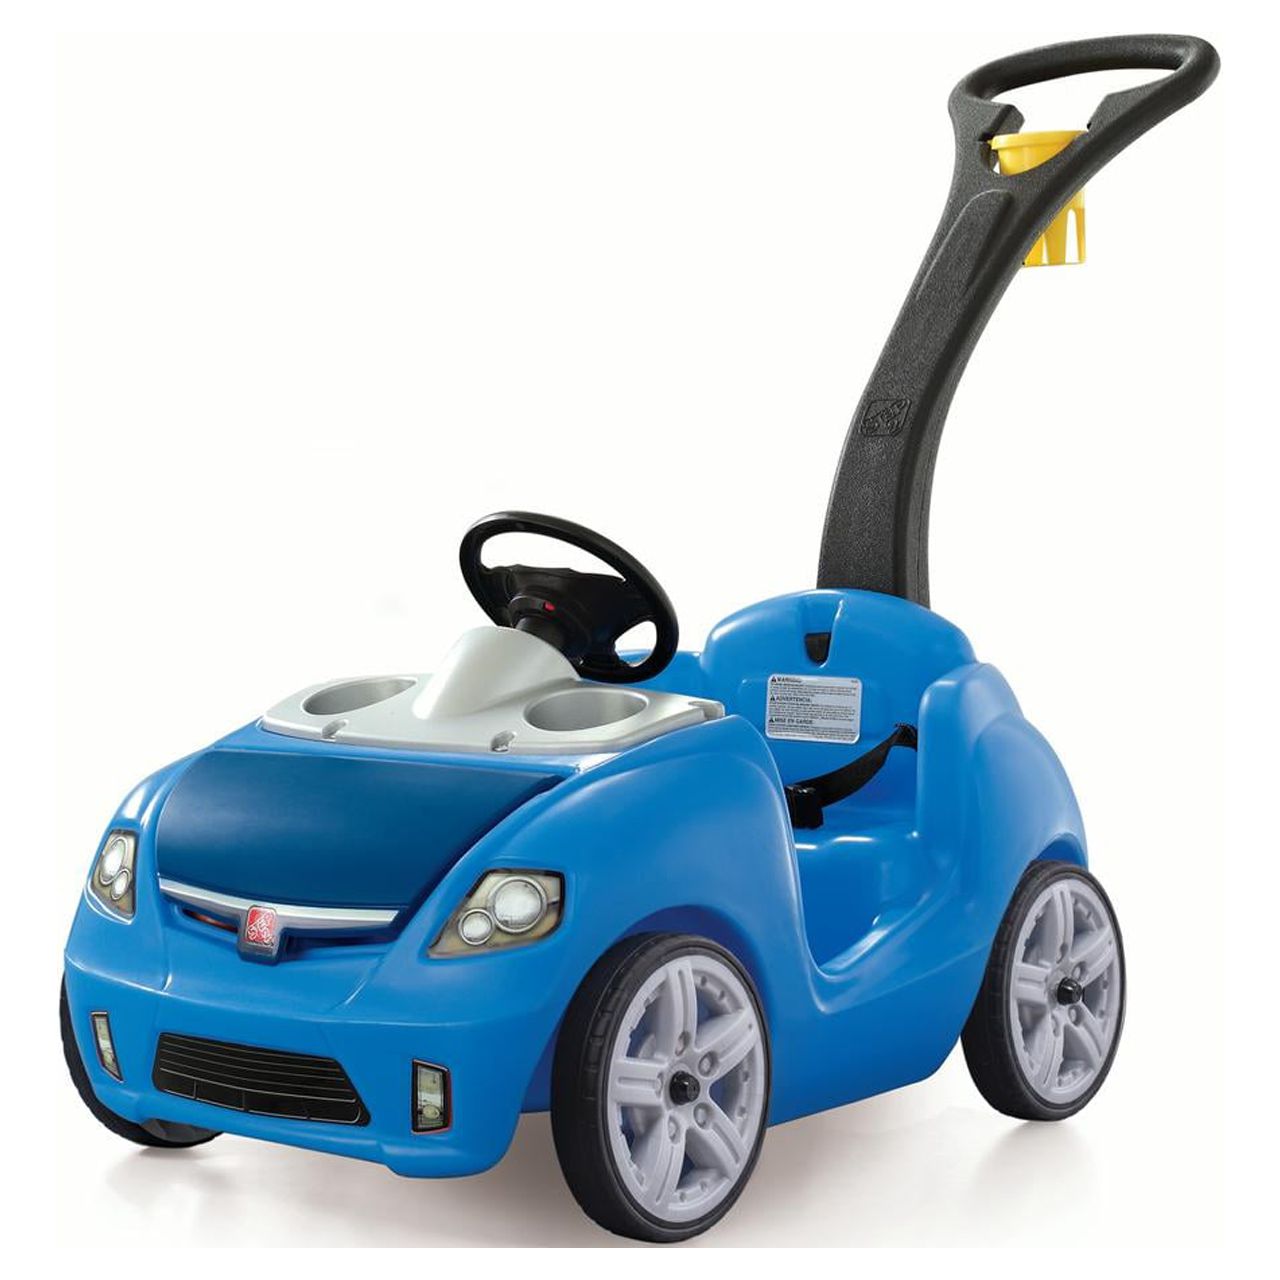 Step2 Whisper Ride II Kids Blue Push Car and Ride on Toy for Toddlers - image 1 of 11